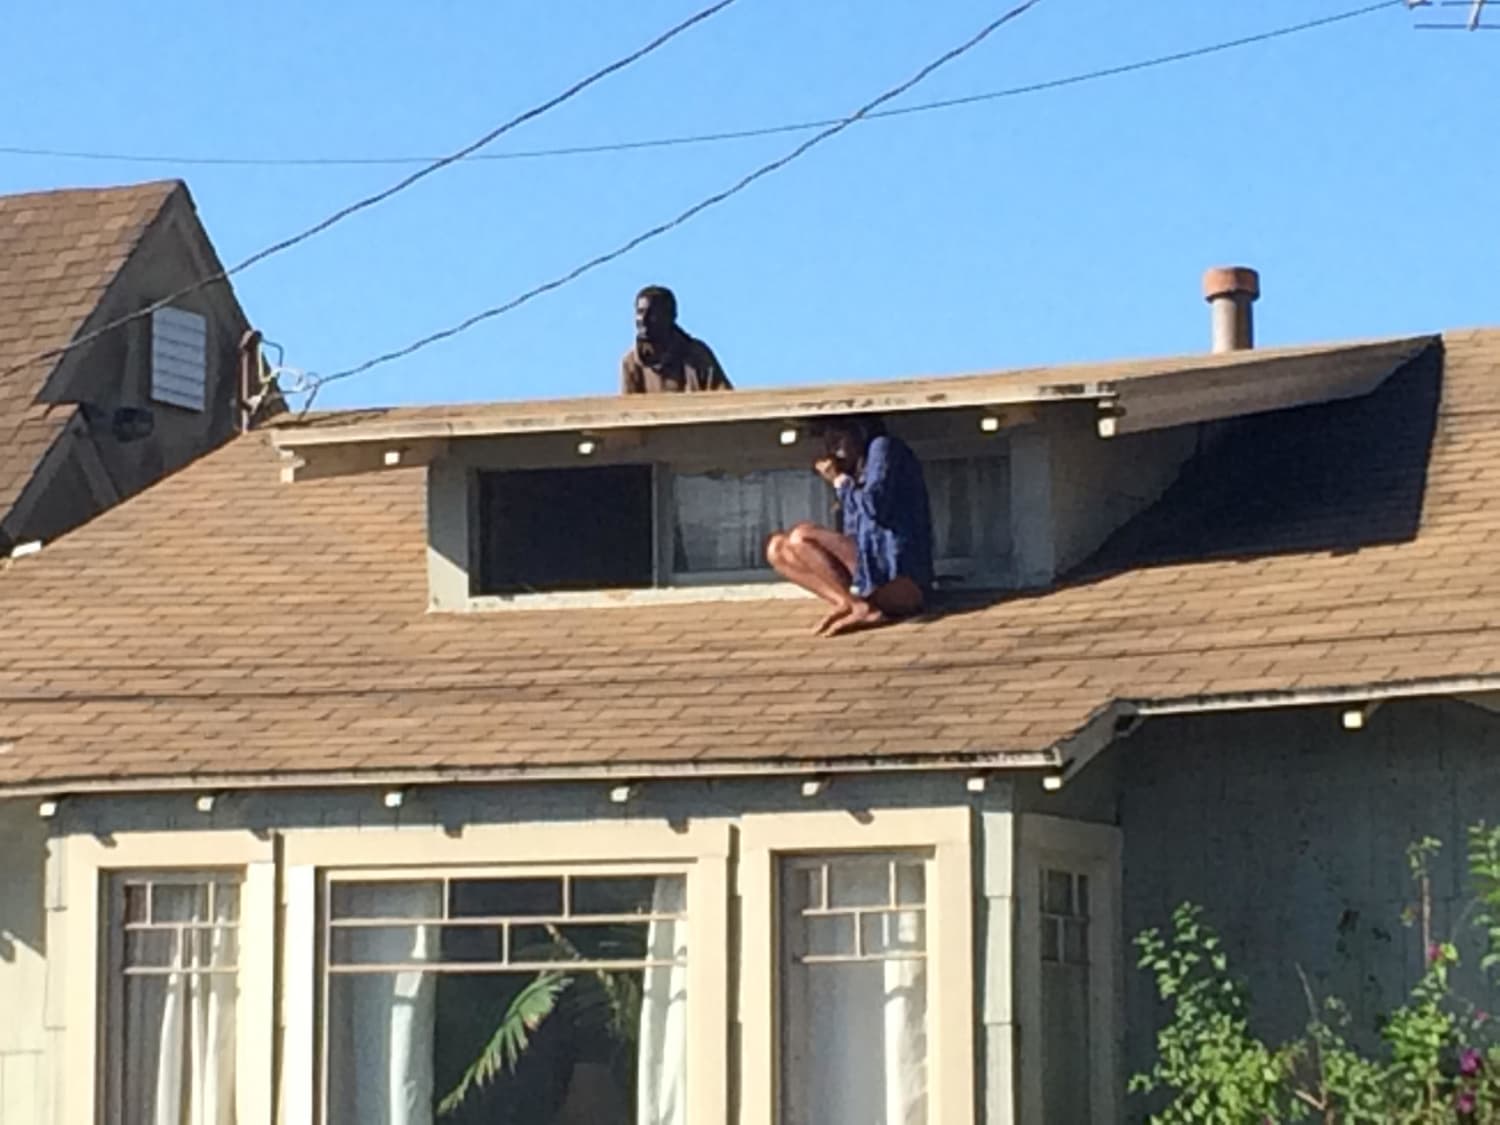 California Woman Flees Intruder on Her Roof in Frightening Moment.